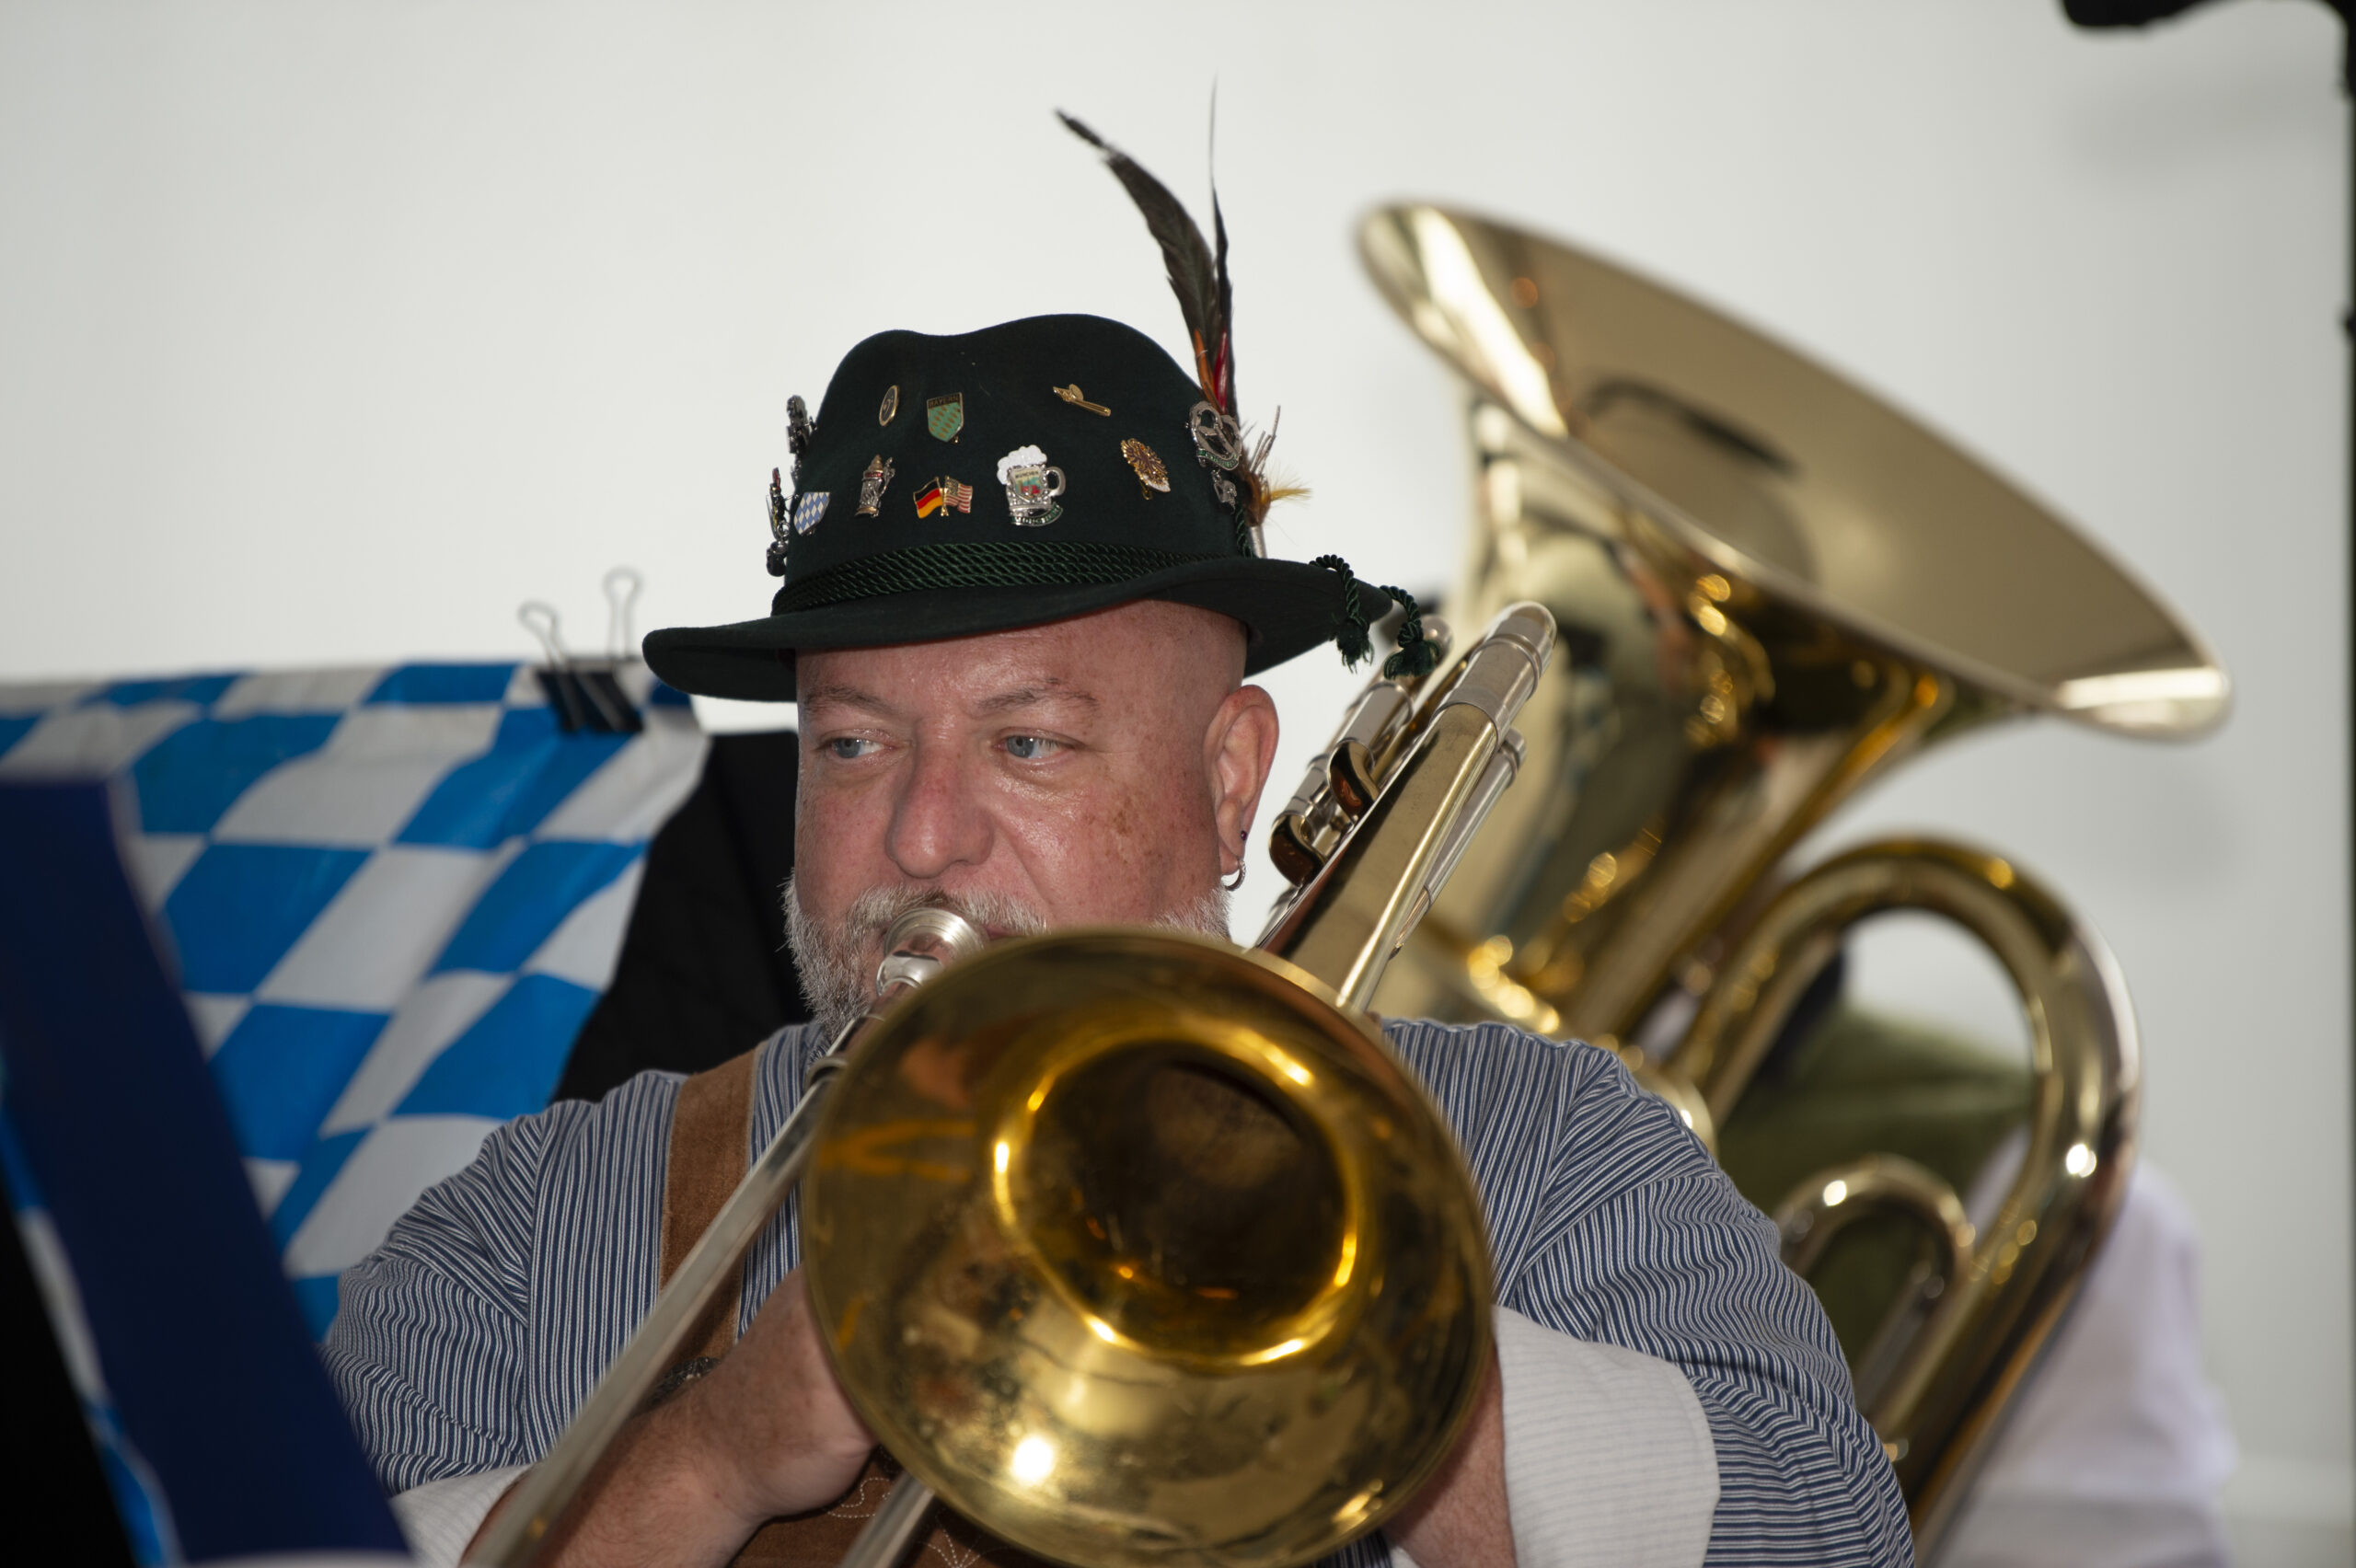 Man playing trombone with tuba in background